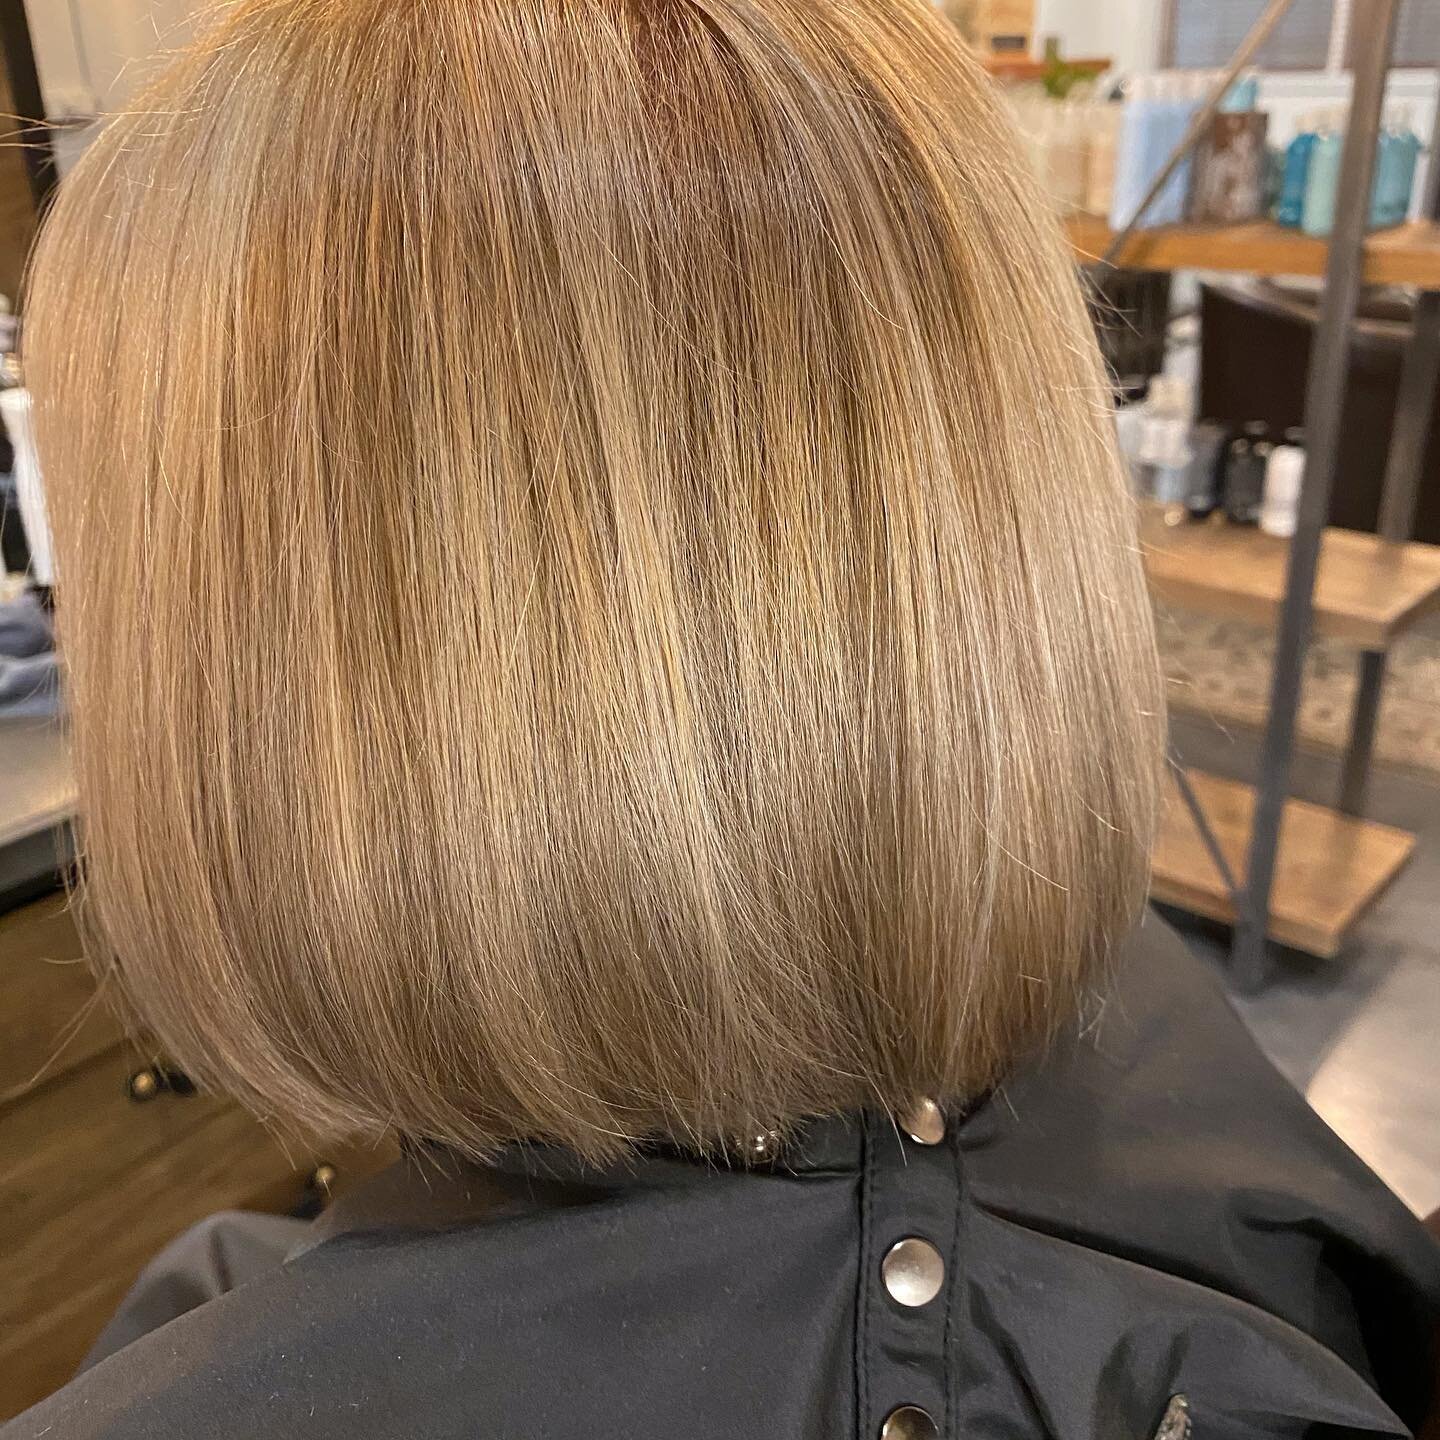 Taking care of business and lovin it! #newcolor #newclientswelcome #healthyhair @olaplex @behindthechair_stylist #easthamptonmassachusetts #holyokema #conditionyourhair